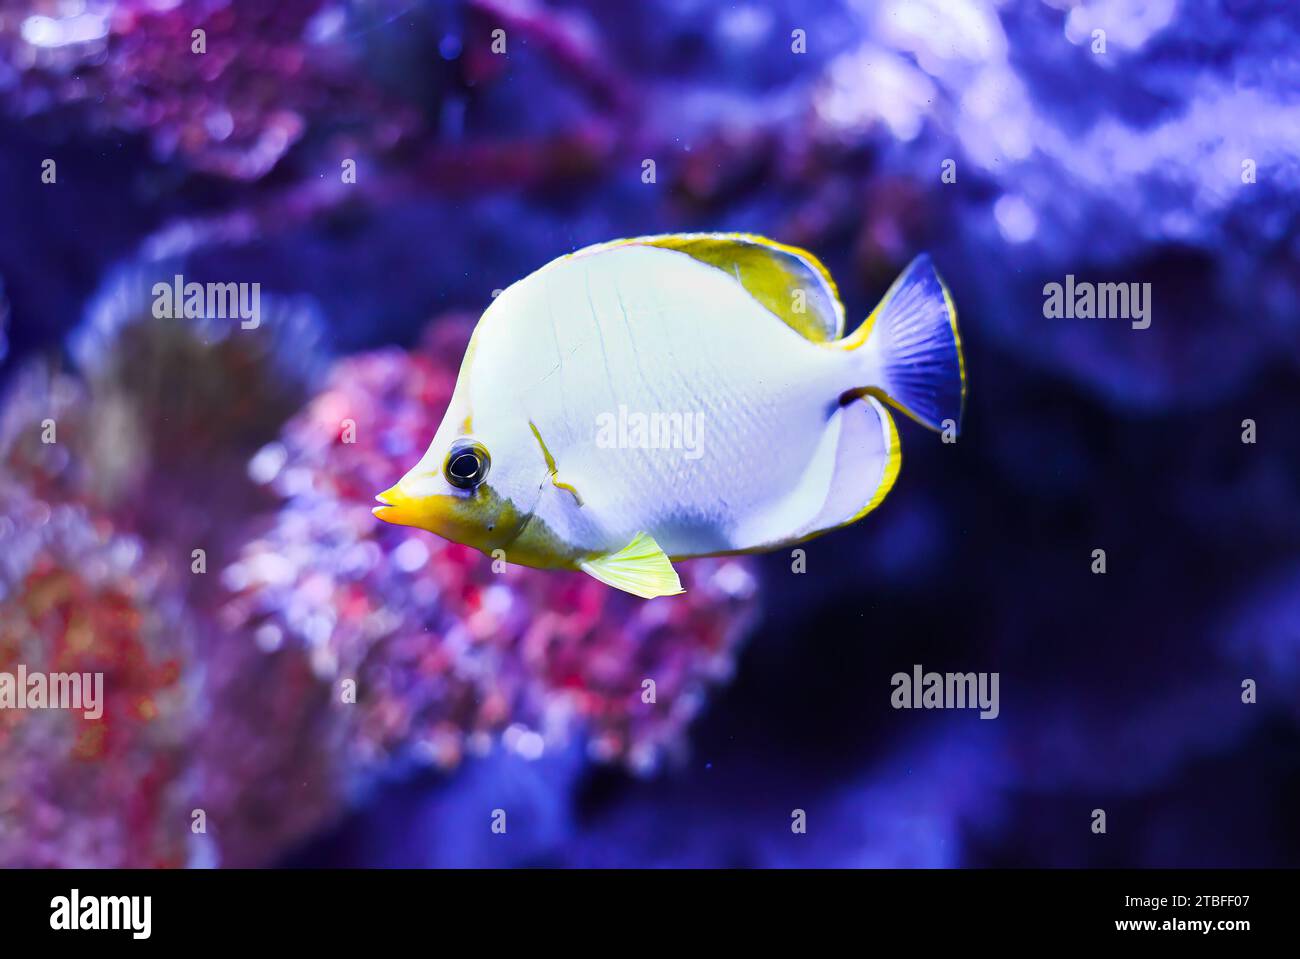 Chaetodon xanthocephalus, known commonly as the Yellowhead butterflyfish in aquarium in Thailand Stock Photo